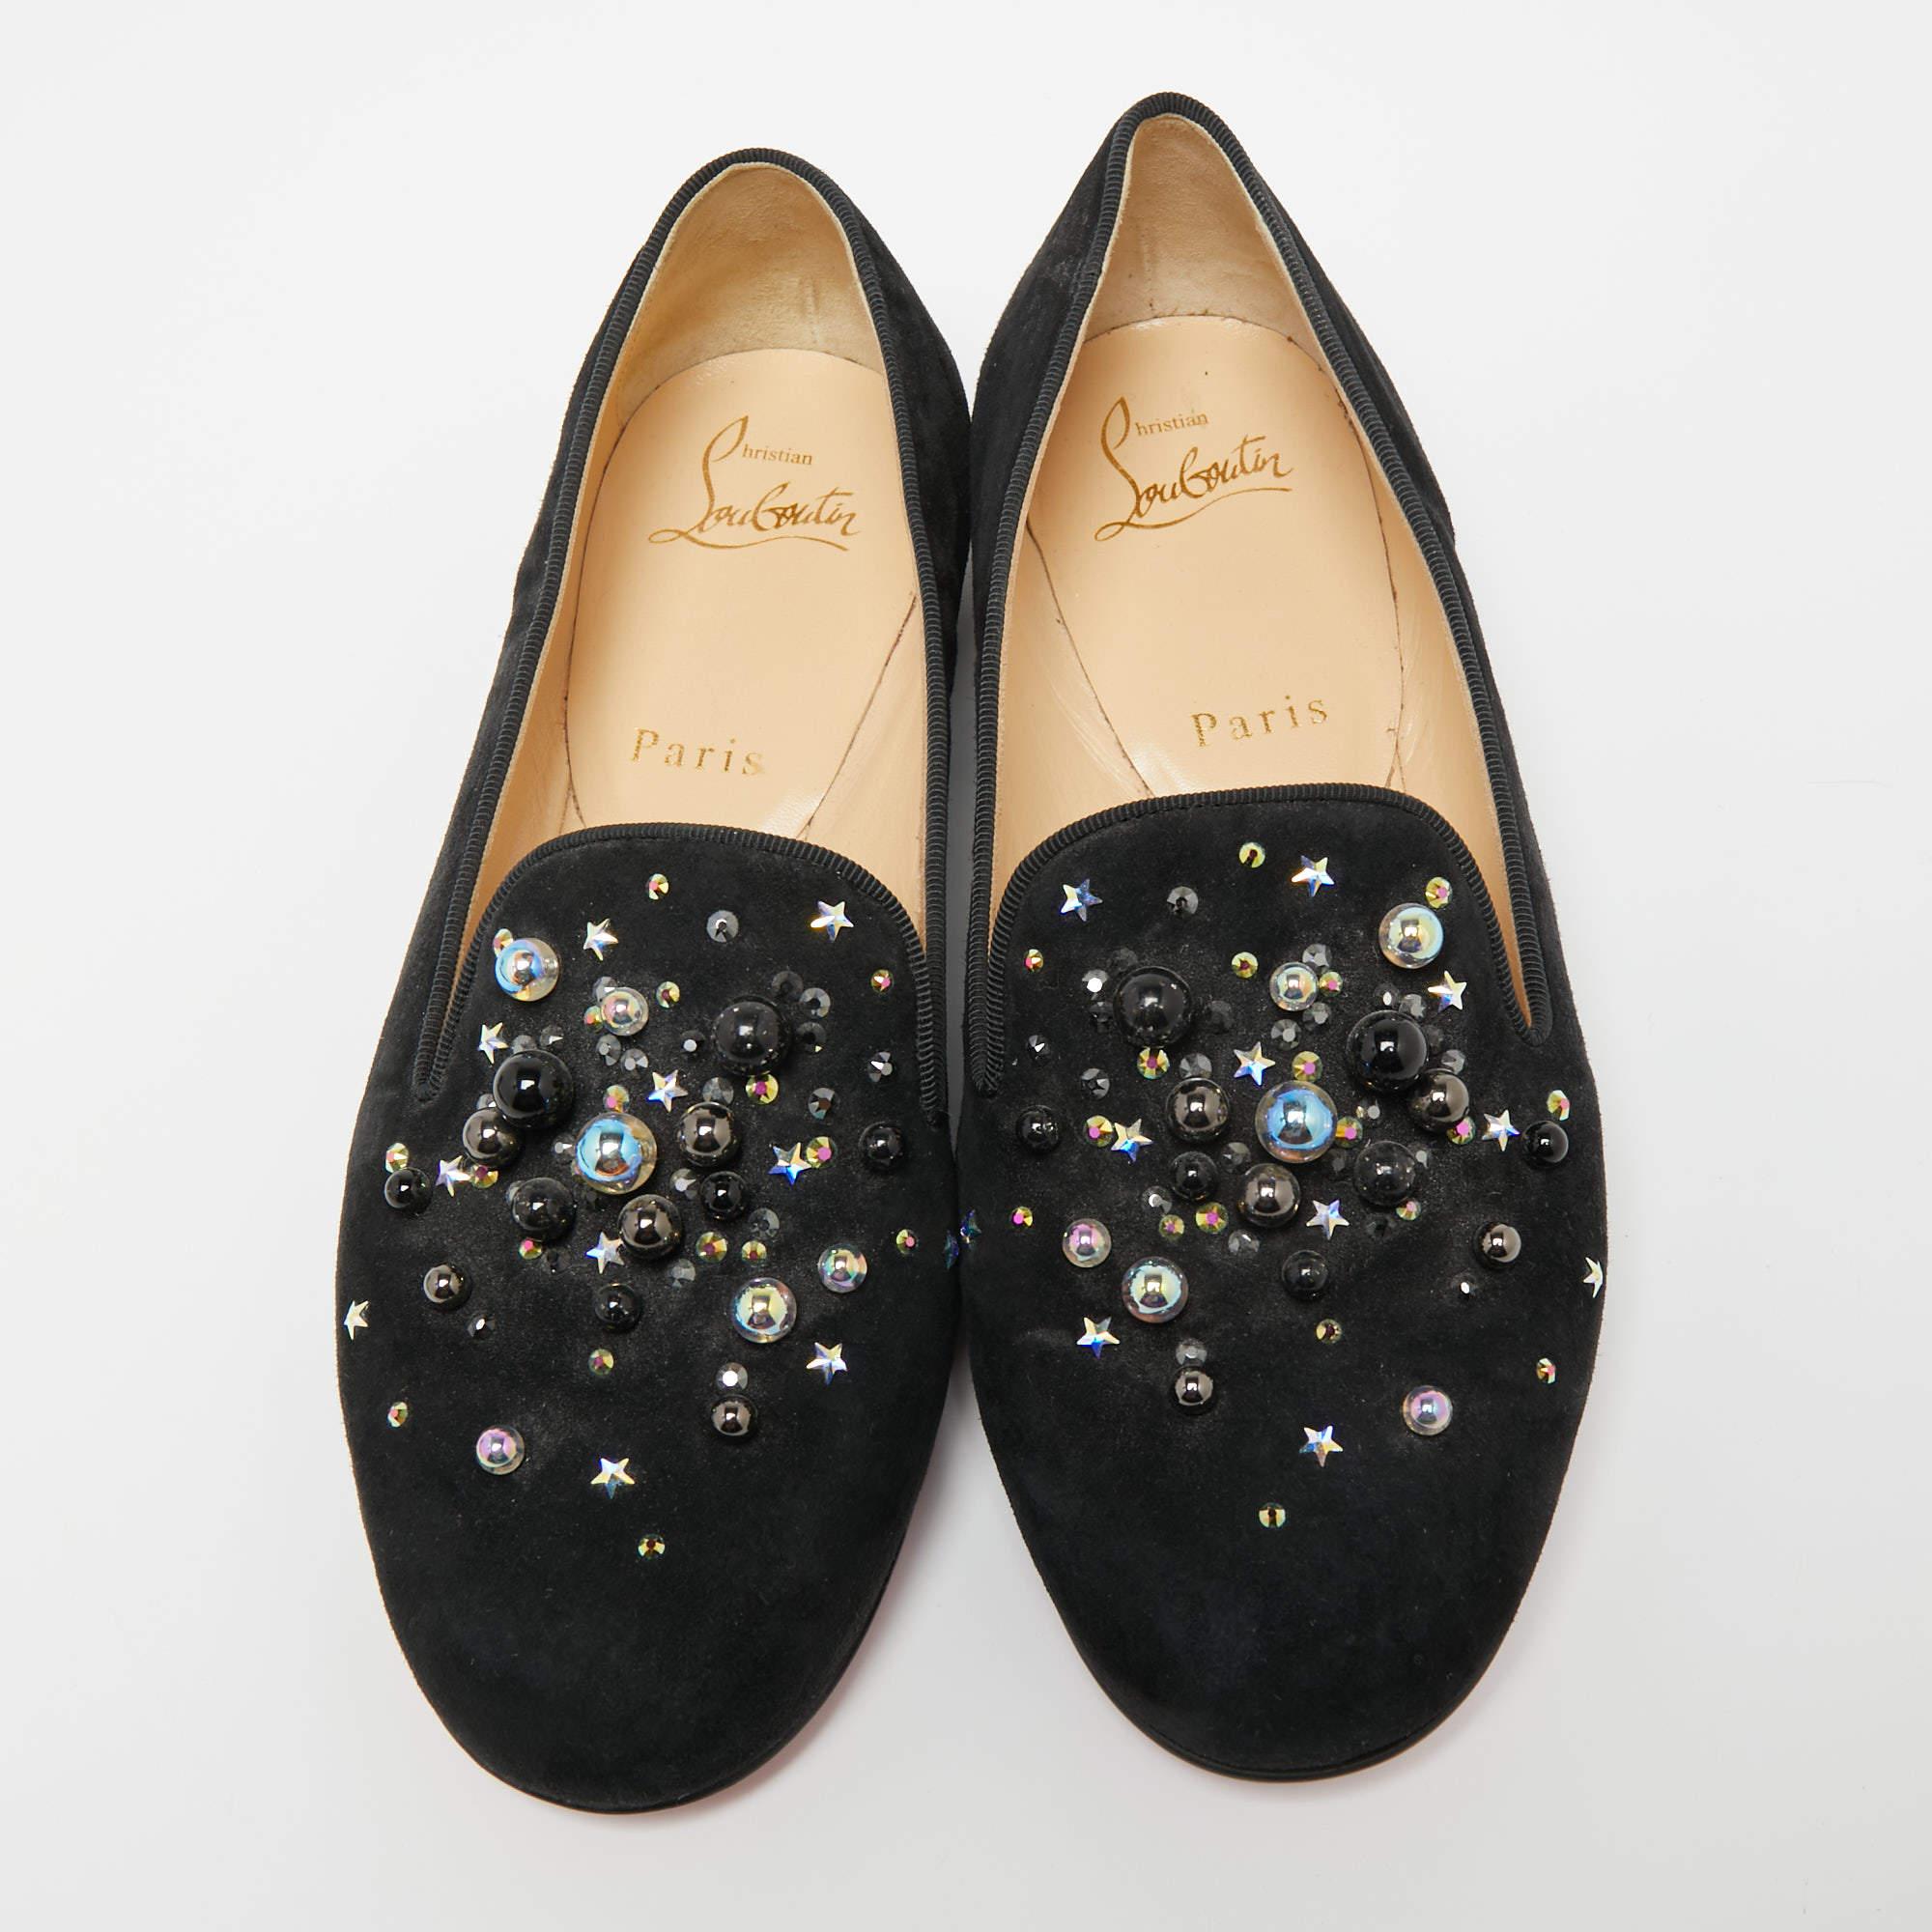 These smoking slippers from the House of Christian Louboutin are here to grant your feet the ultimate comfortable experience. They are crafted from black suede, which is elevated with delicate embellishments. Add these trendy CL slippers to your